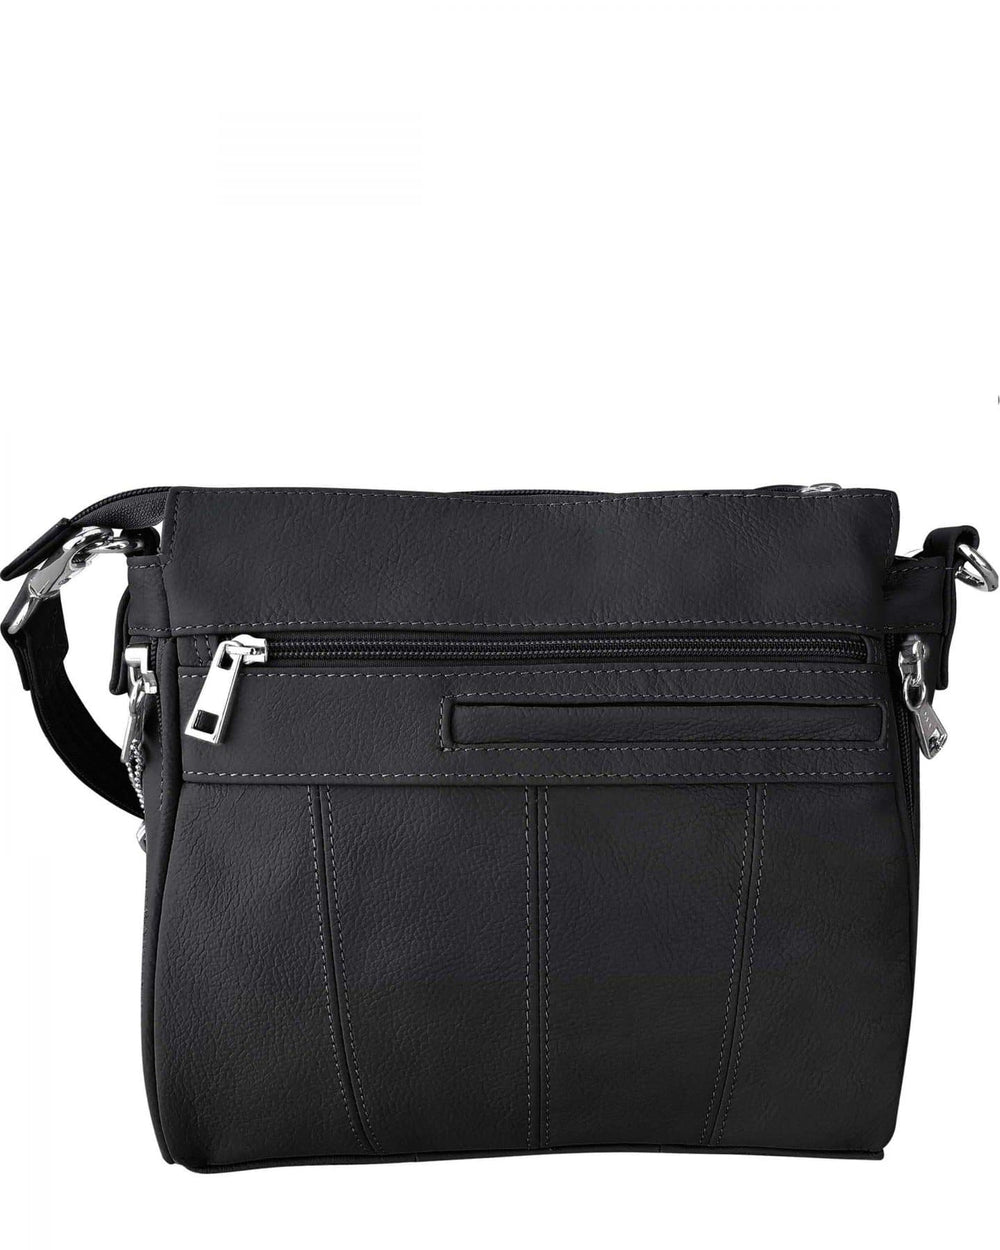 Buckle Front Leather Concealment Crossbody Bag